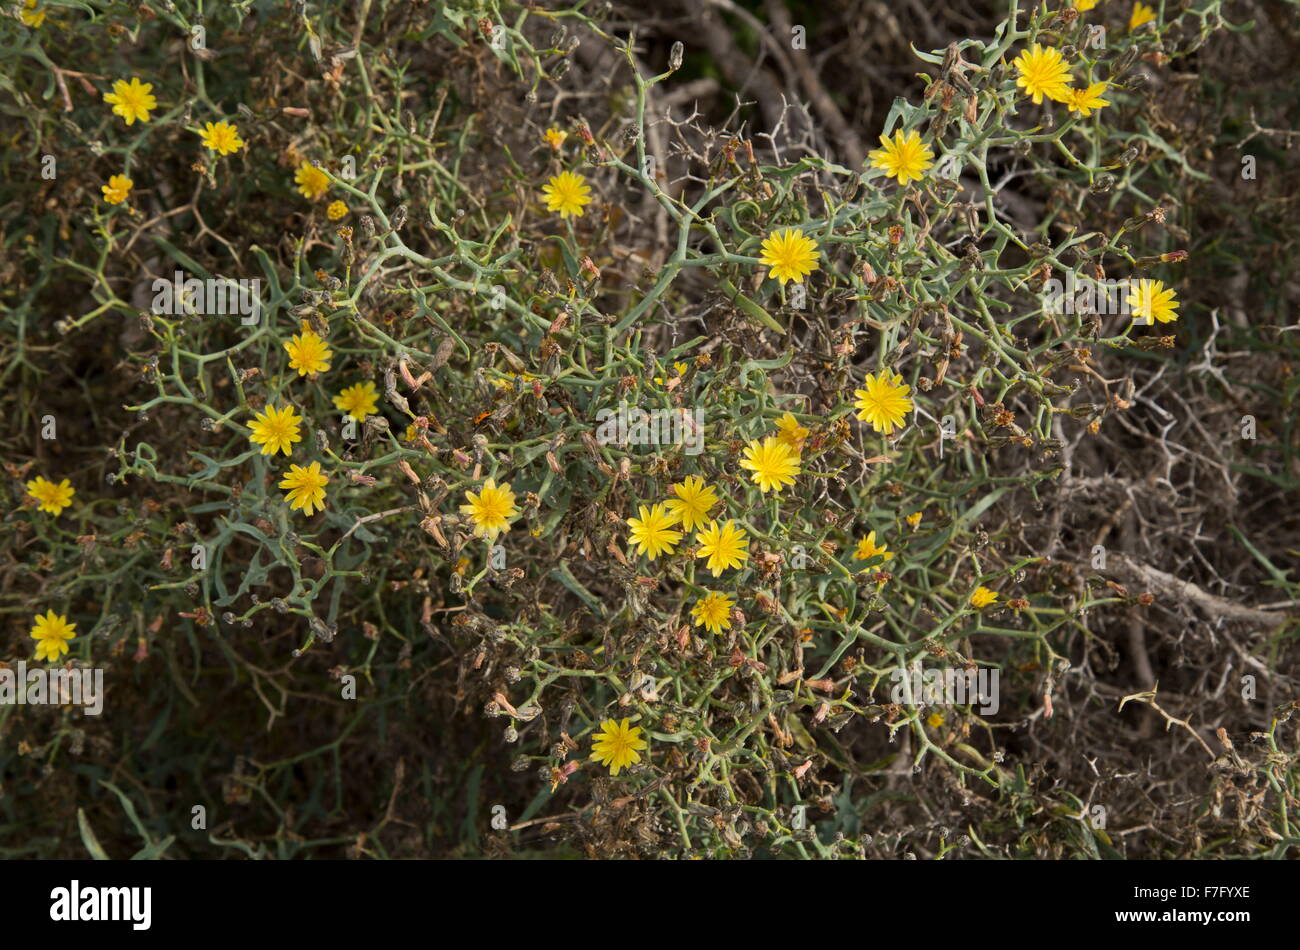 A spiny yellow composite, Launaea arborescens, growing on dry hillsides. Spain. Stock Photo